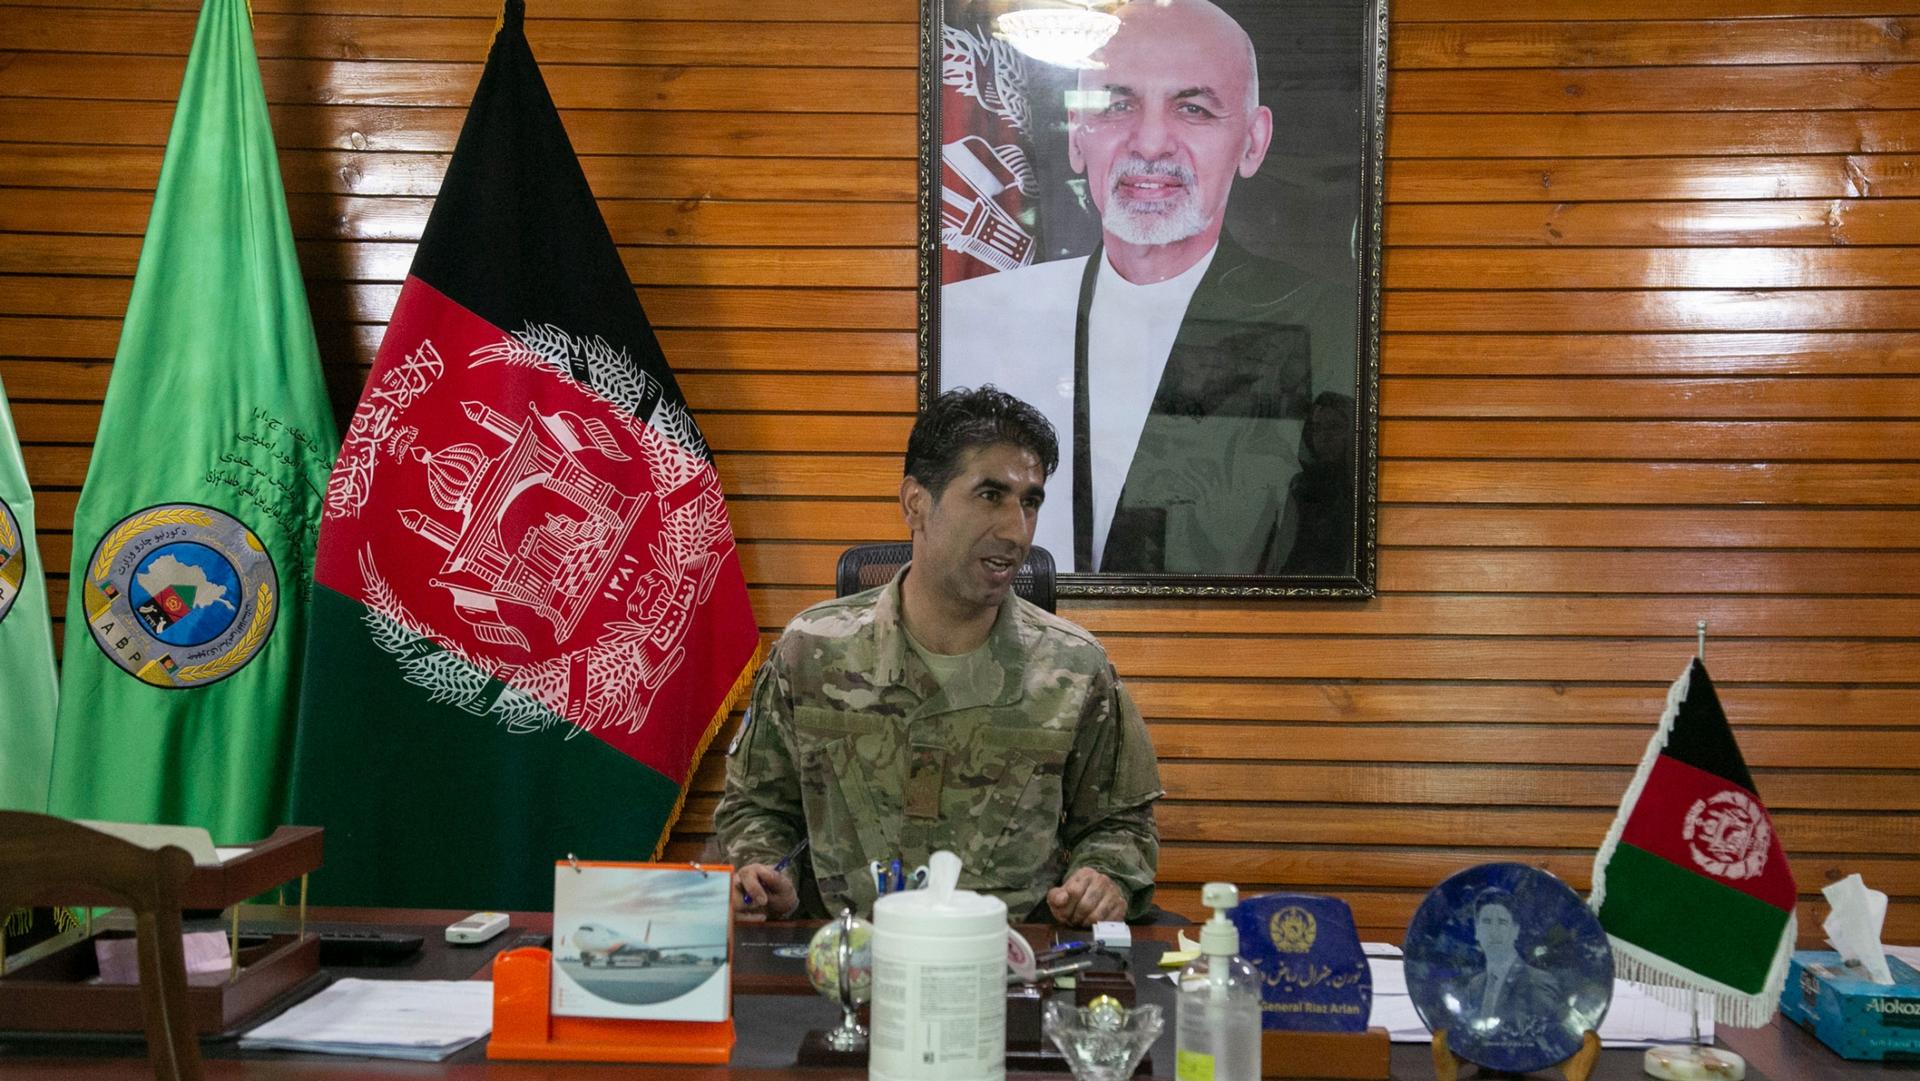 Maj. Gen. Mohammad Reyaz Arian is shown sitting at a large wooden desk and wearing military fatigues with the Afghanistan flag and a portrait photo of former President Ashraf Ghani on the wall.